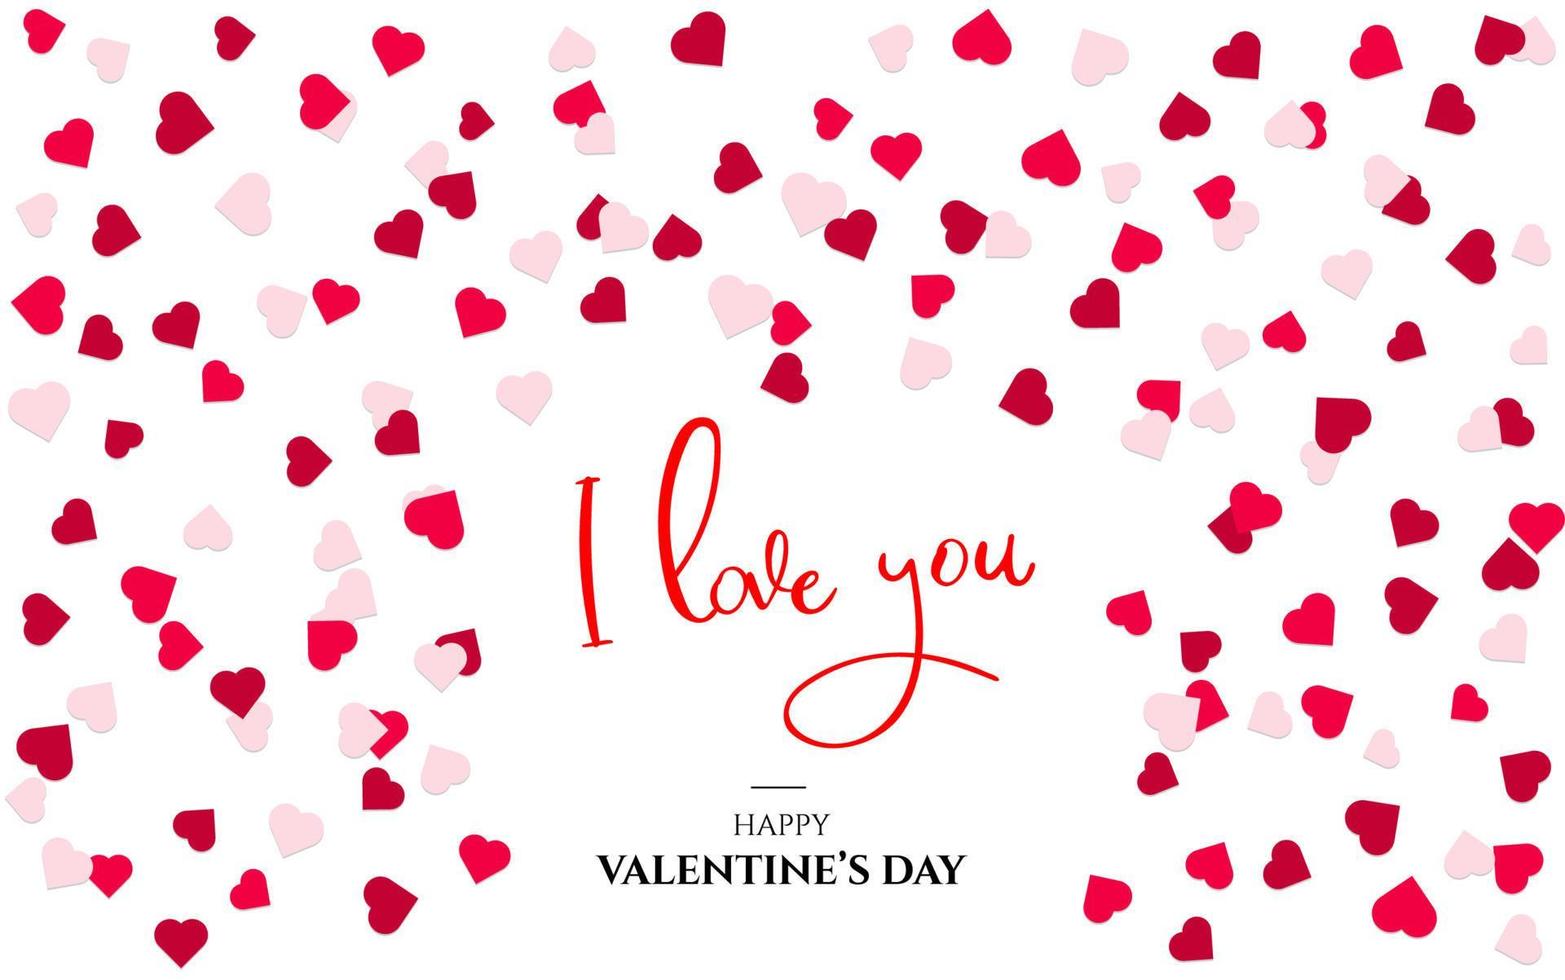 Valentine's Day card with hearts background vector